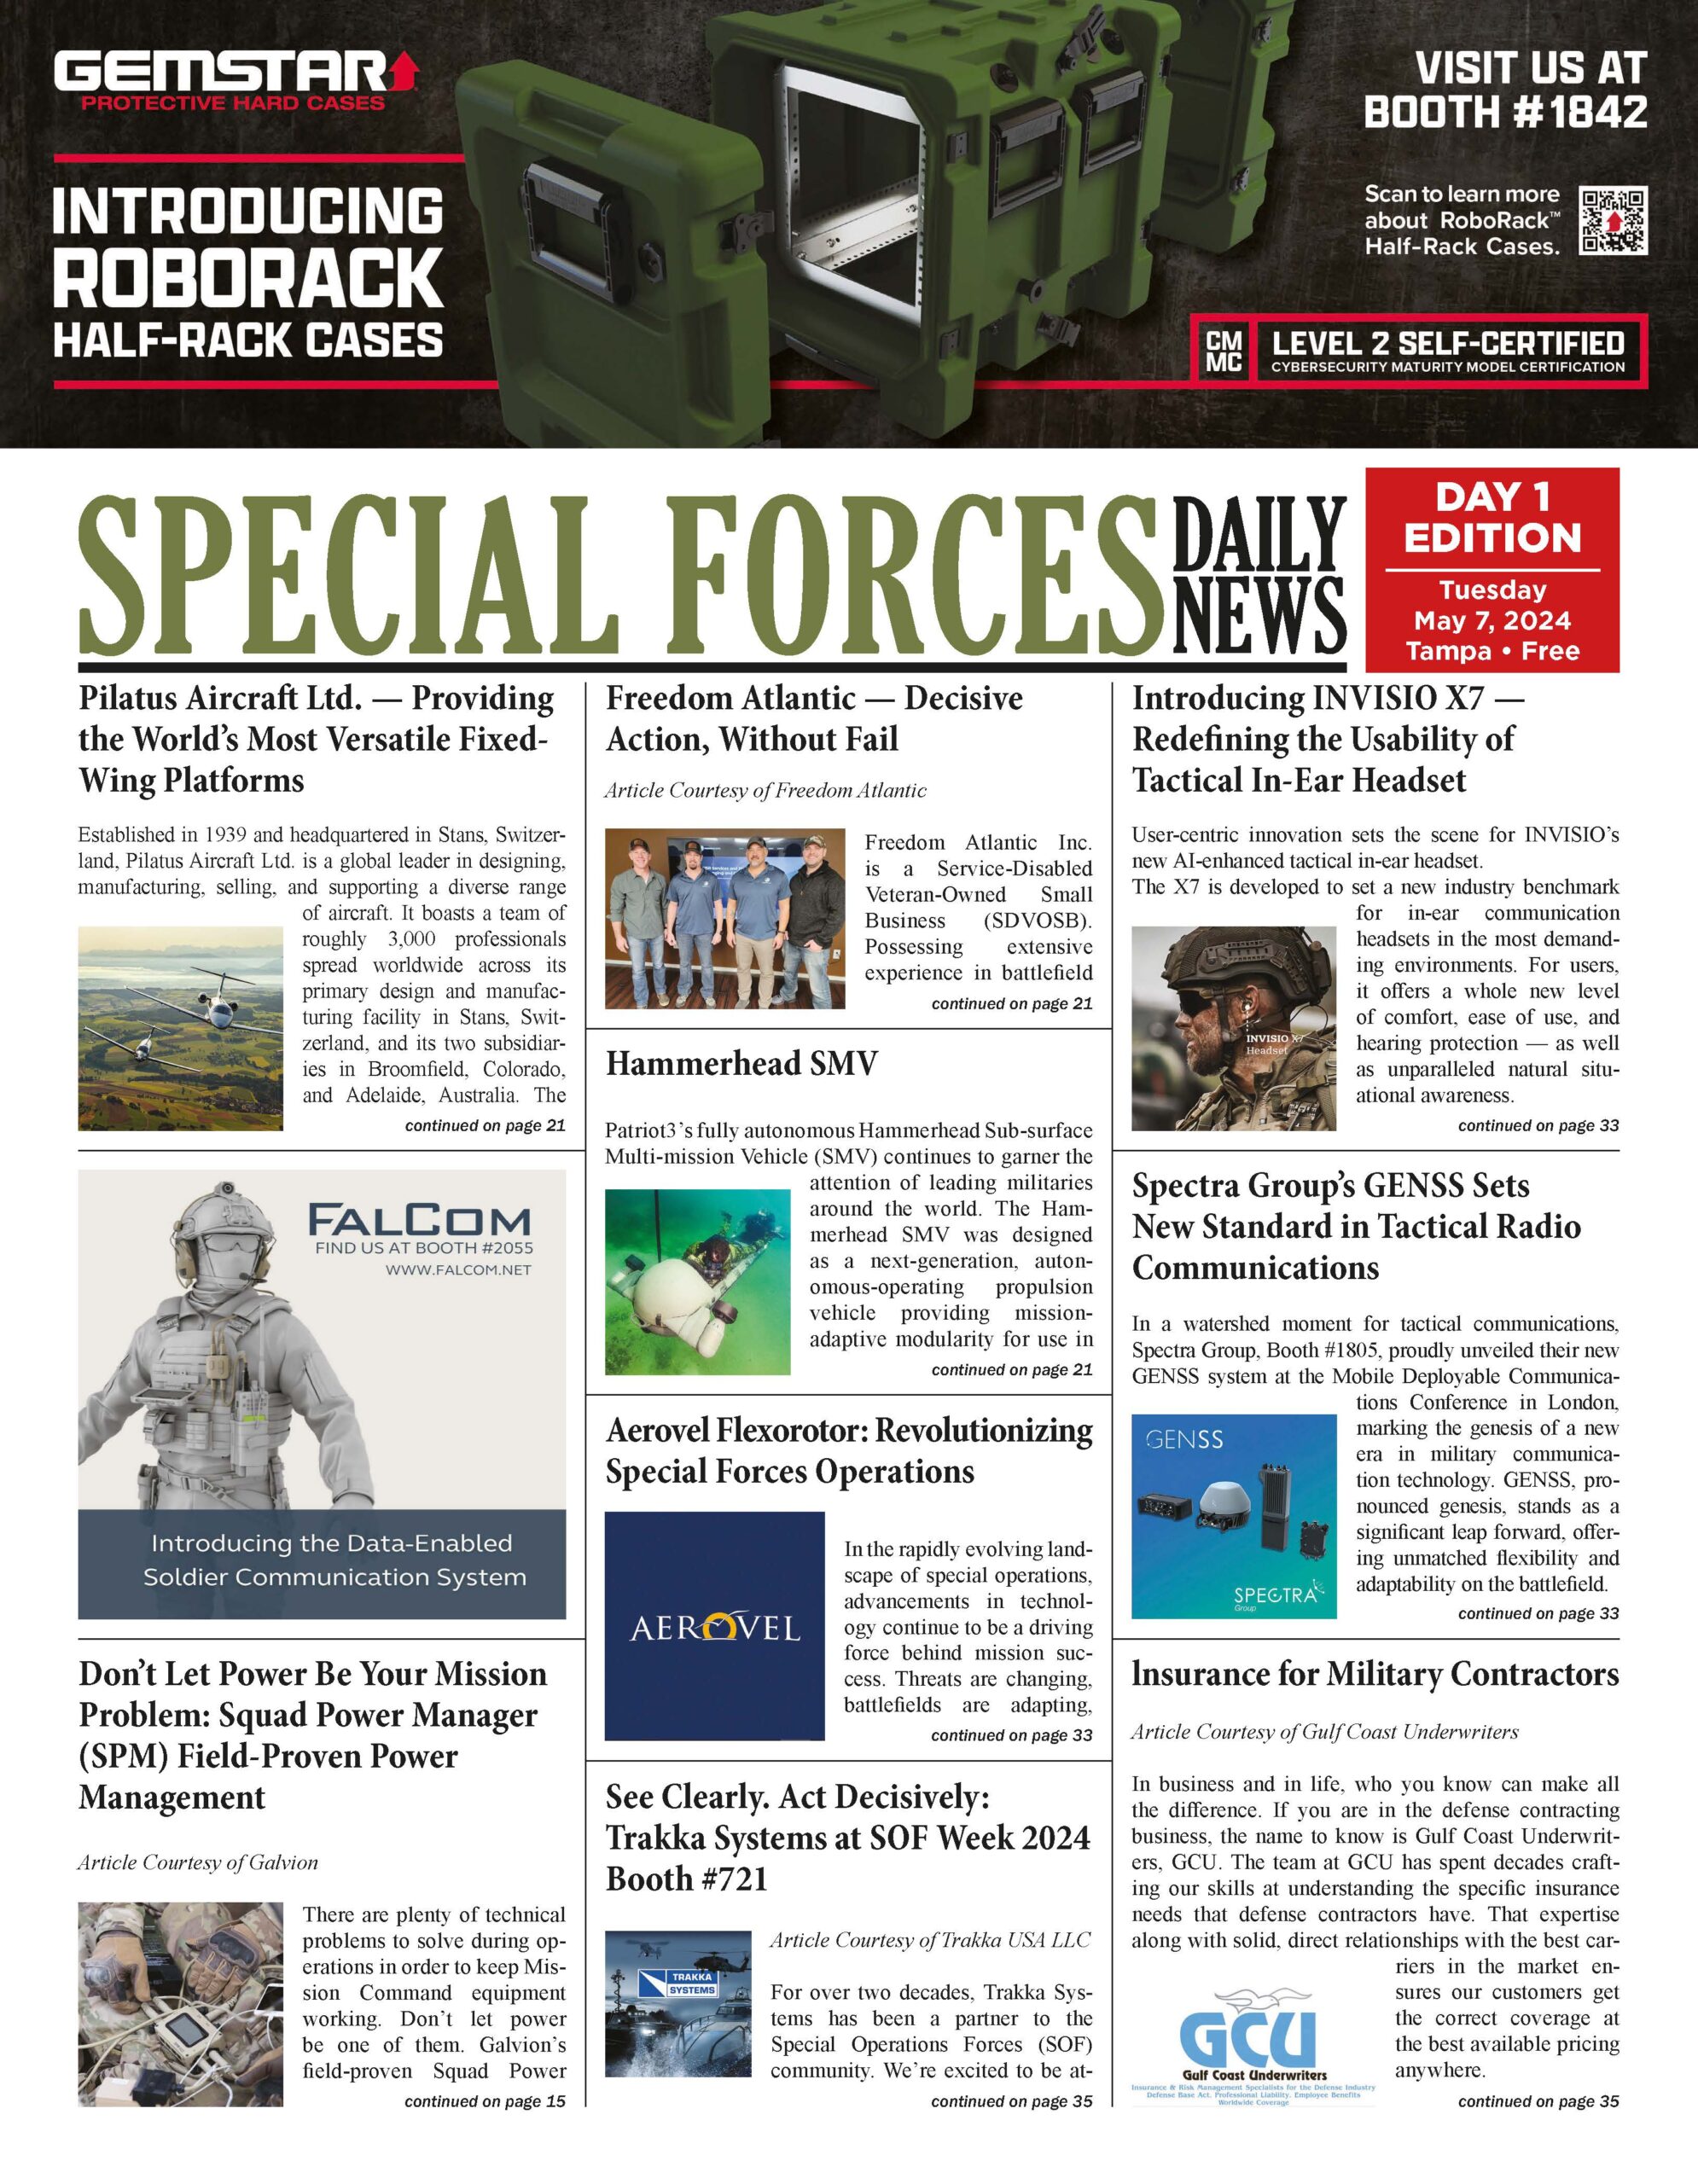 Special Forces Daily News